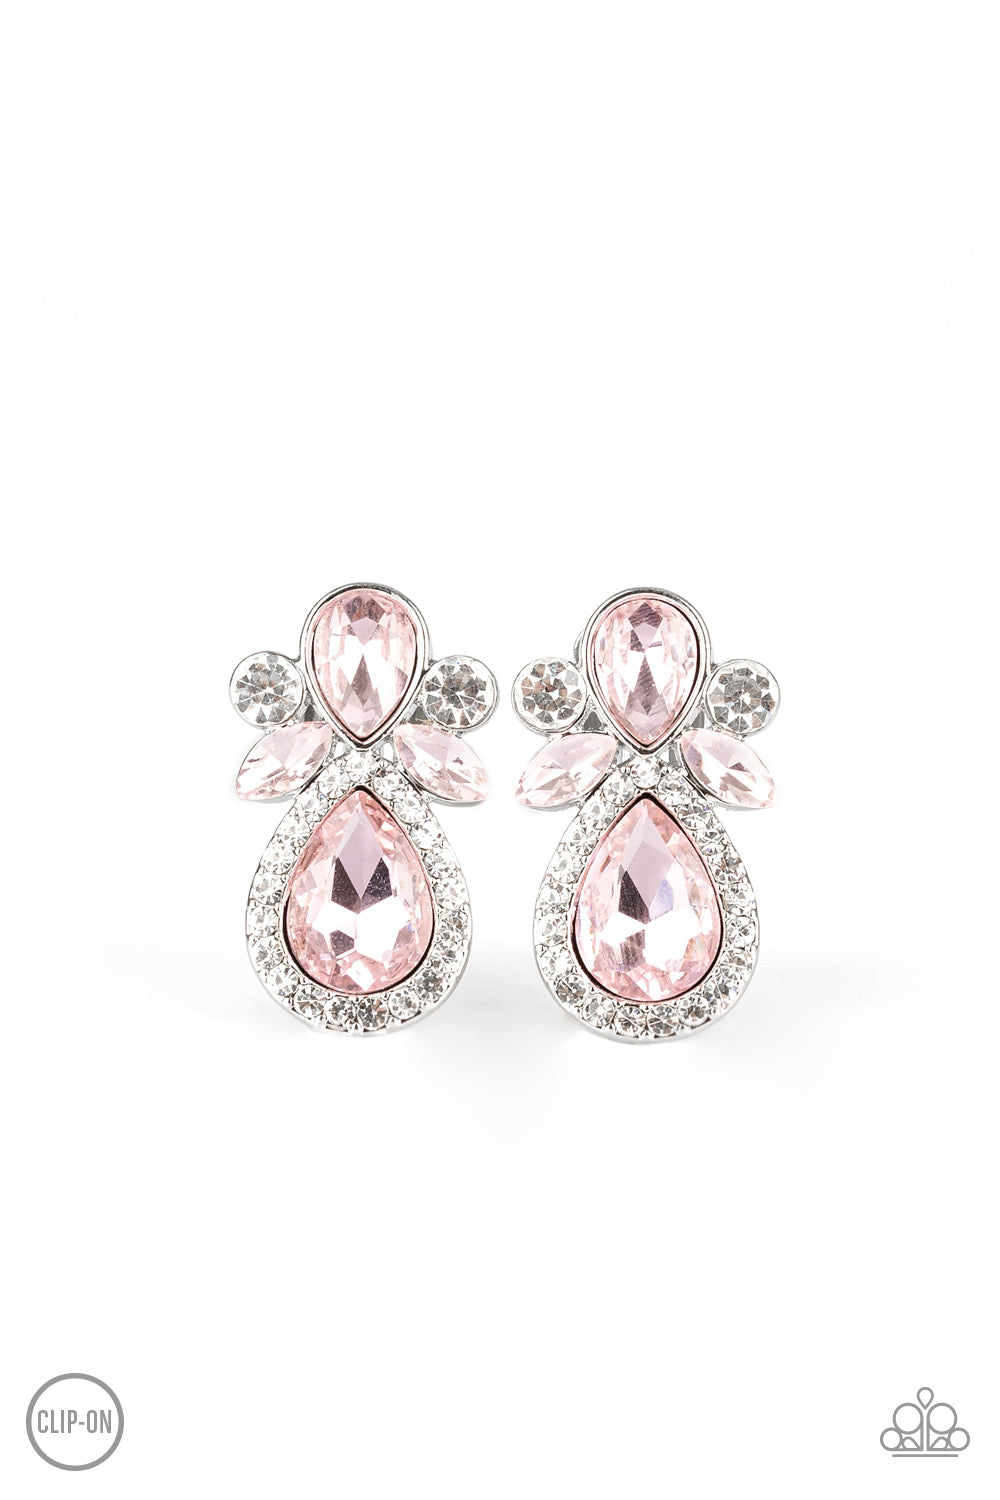 Celebrity Crowd - Pink Earrings - Paparazzi Accessories 